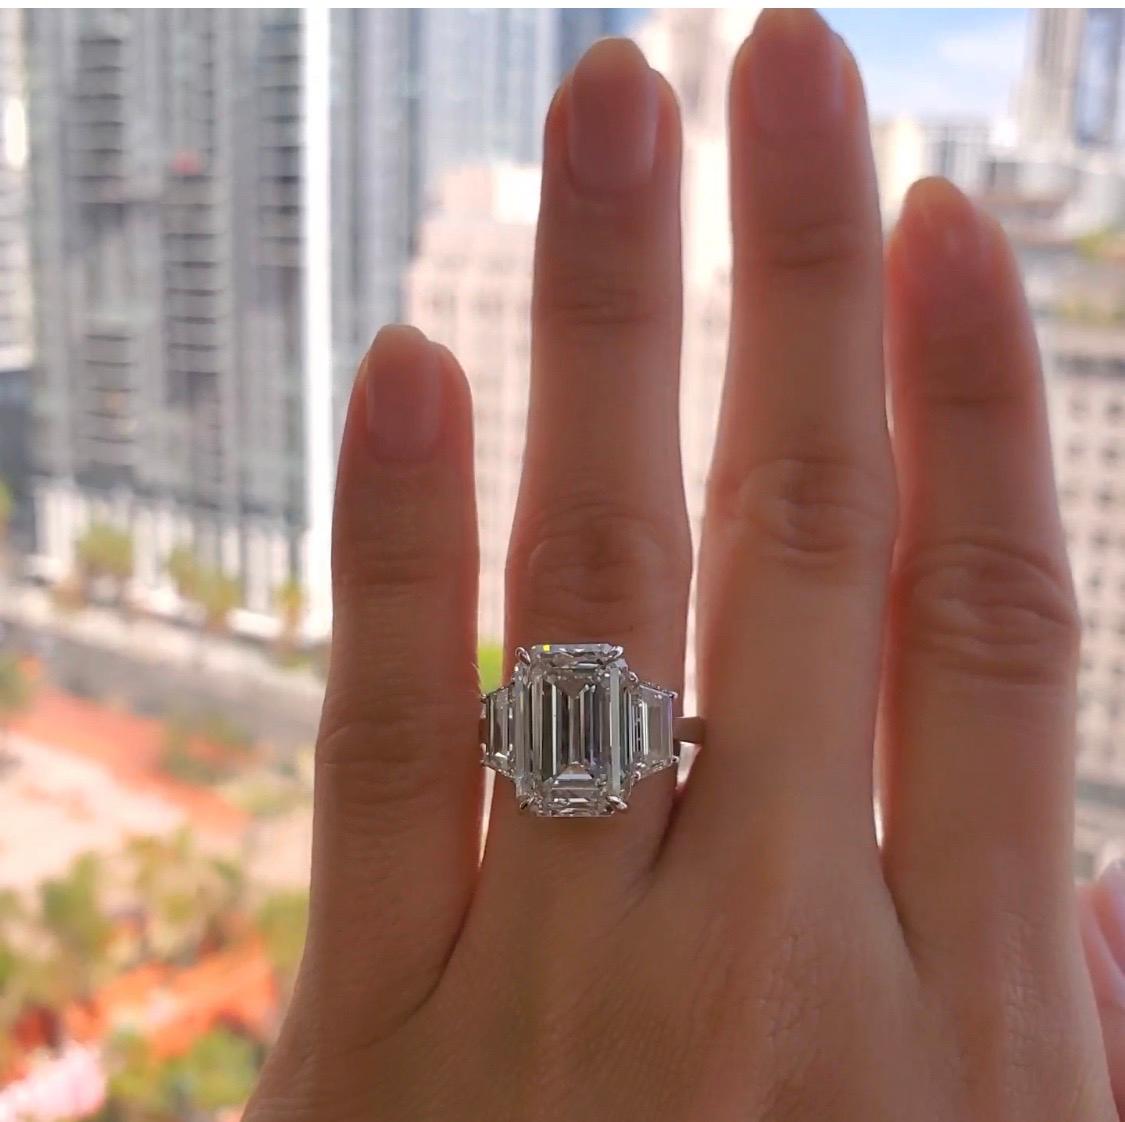 A Stunning Natural Diamond Platinum Engagement Ring. 

The centerstone is an 8.11 carat Natural Emerald Cut Diamond GIA certified as an H in color and VS2 in clarity. The inclusions are very pleasant and the polish and symmetry are very good. The